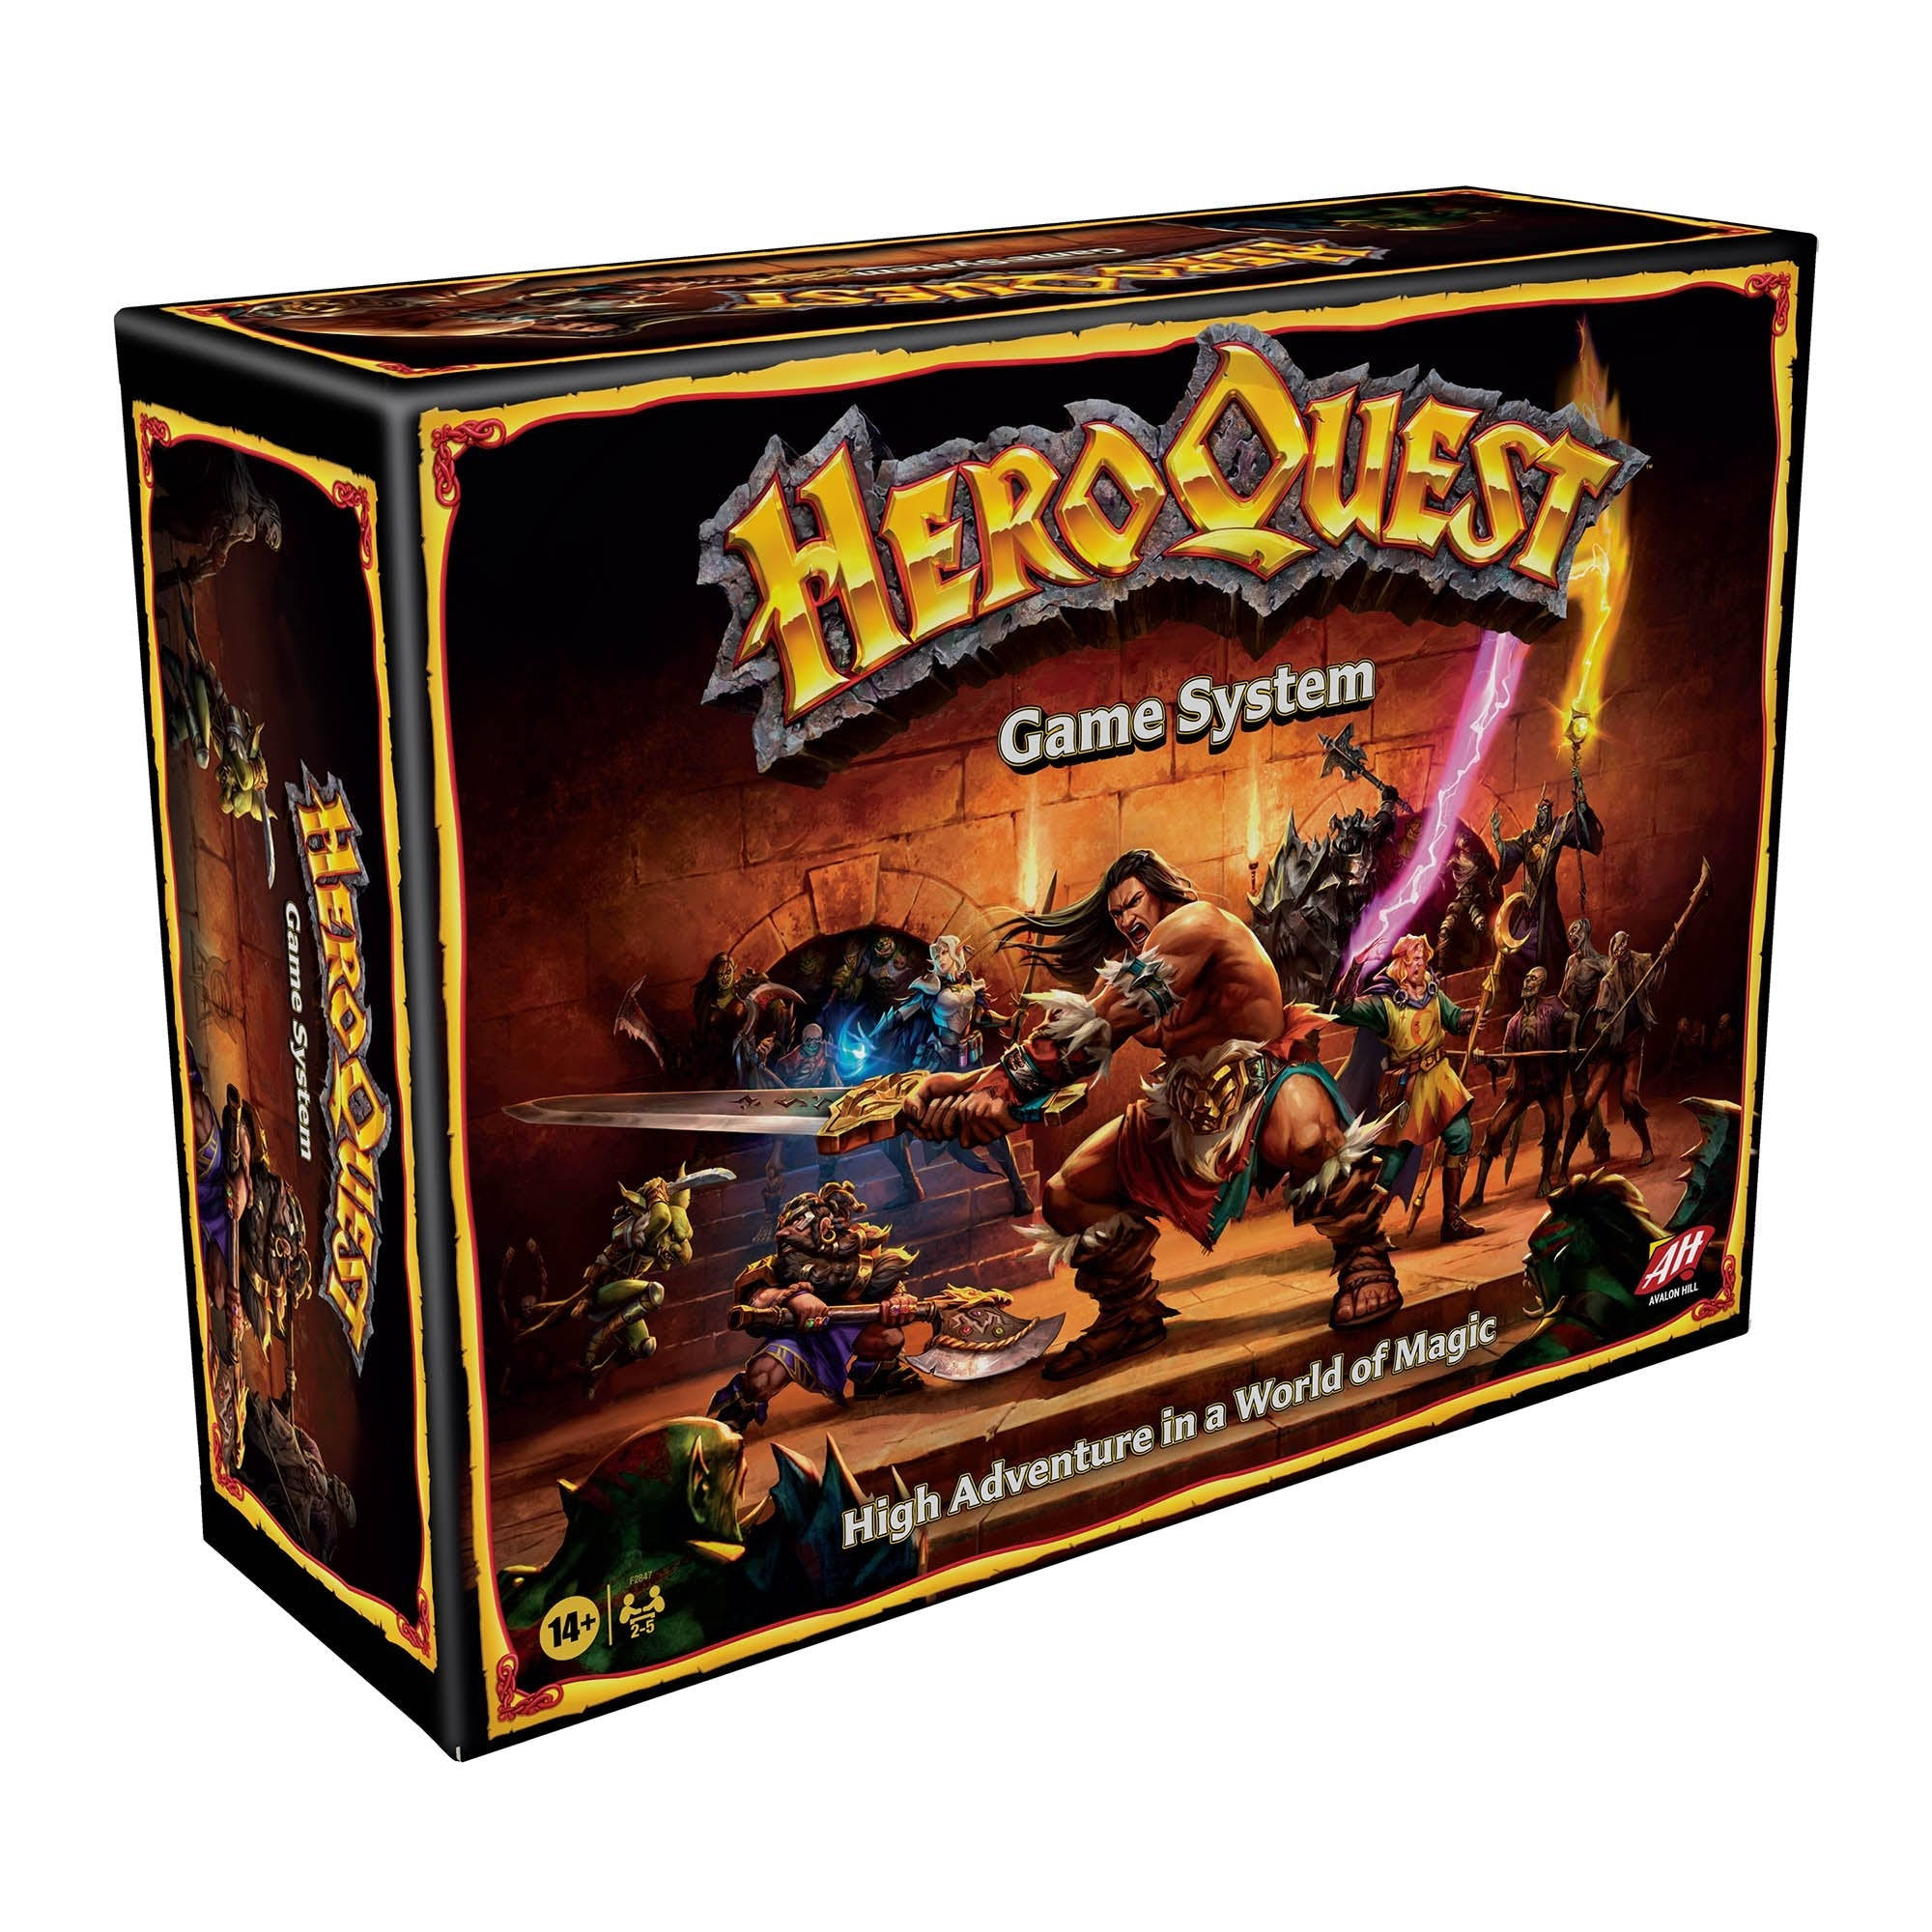 Hasbro Heroquest Game System